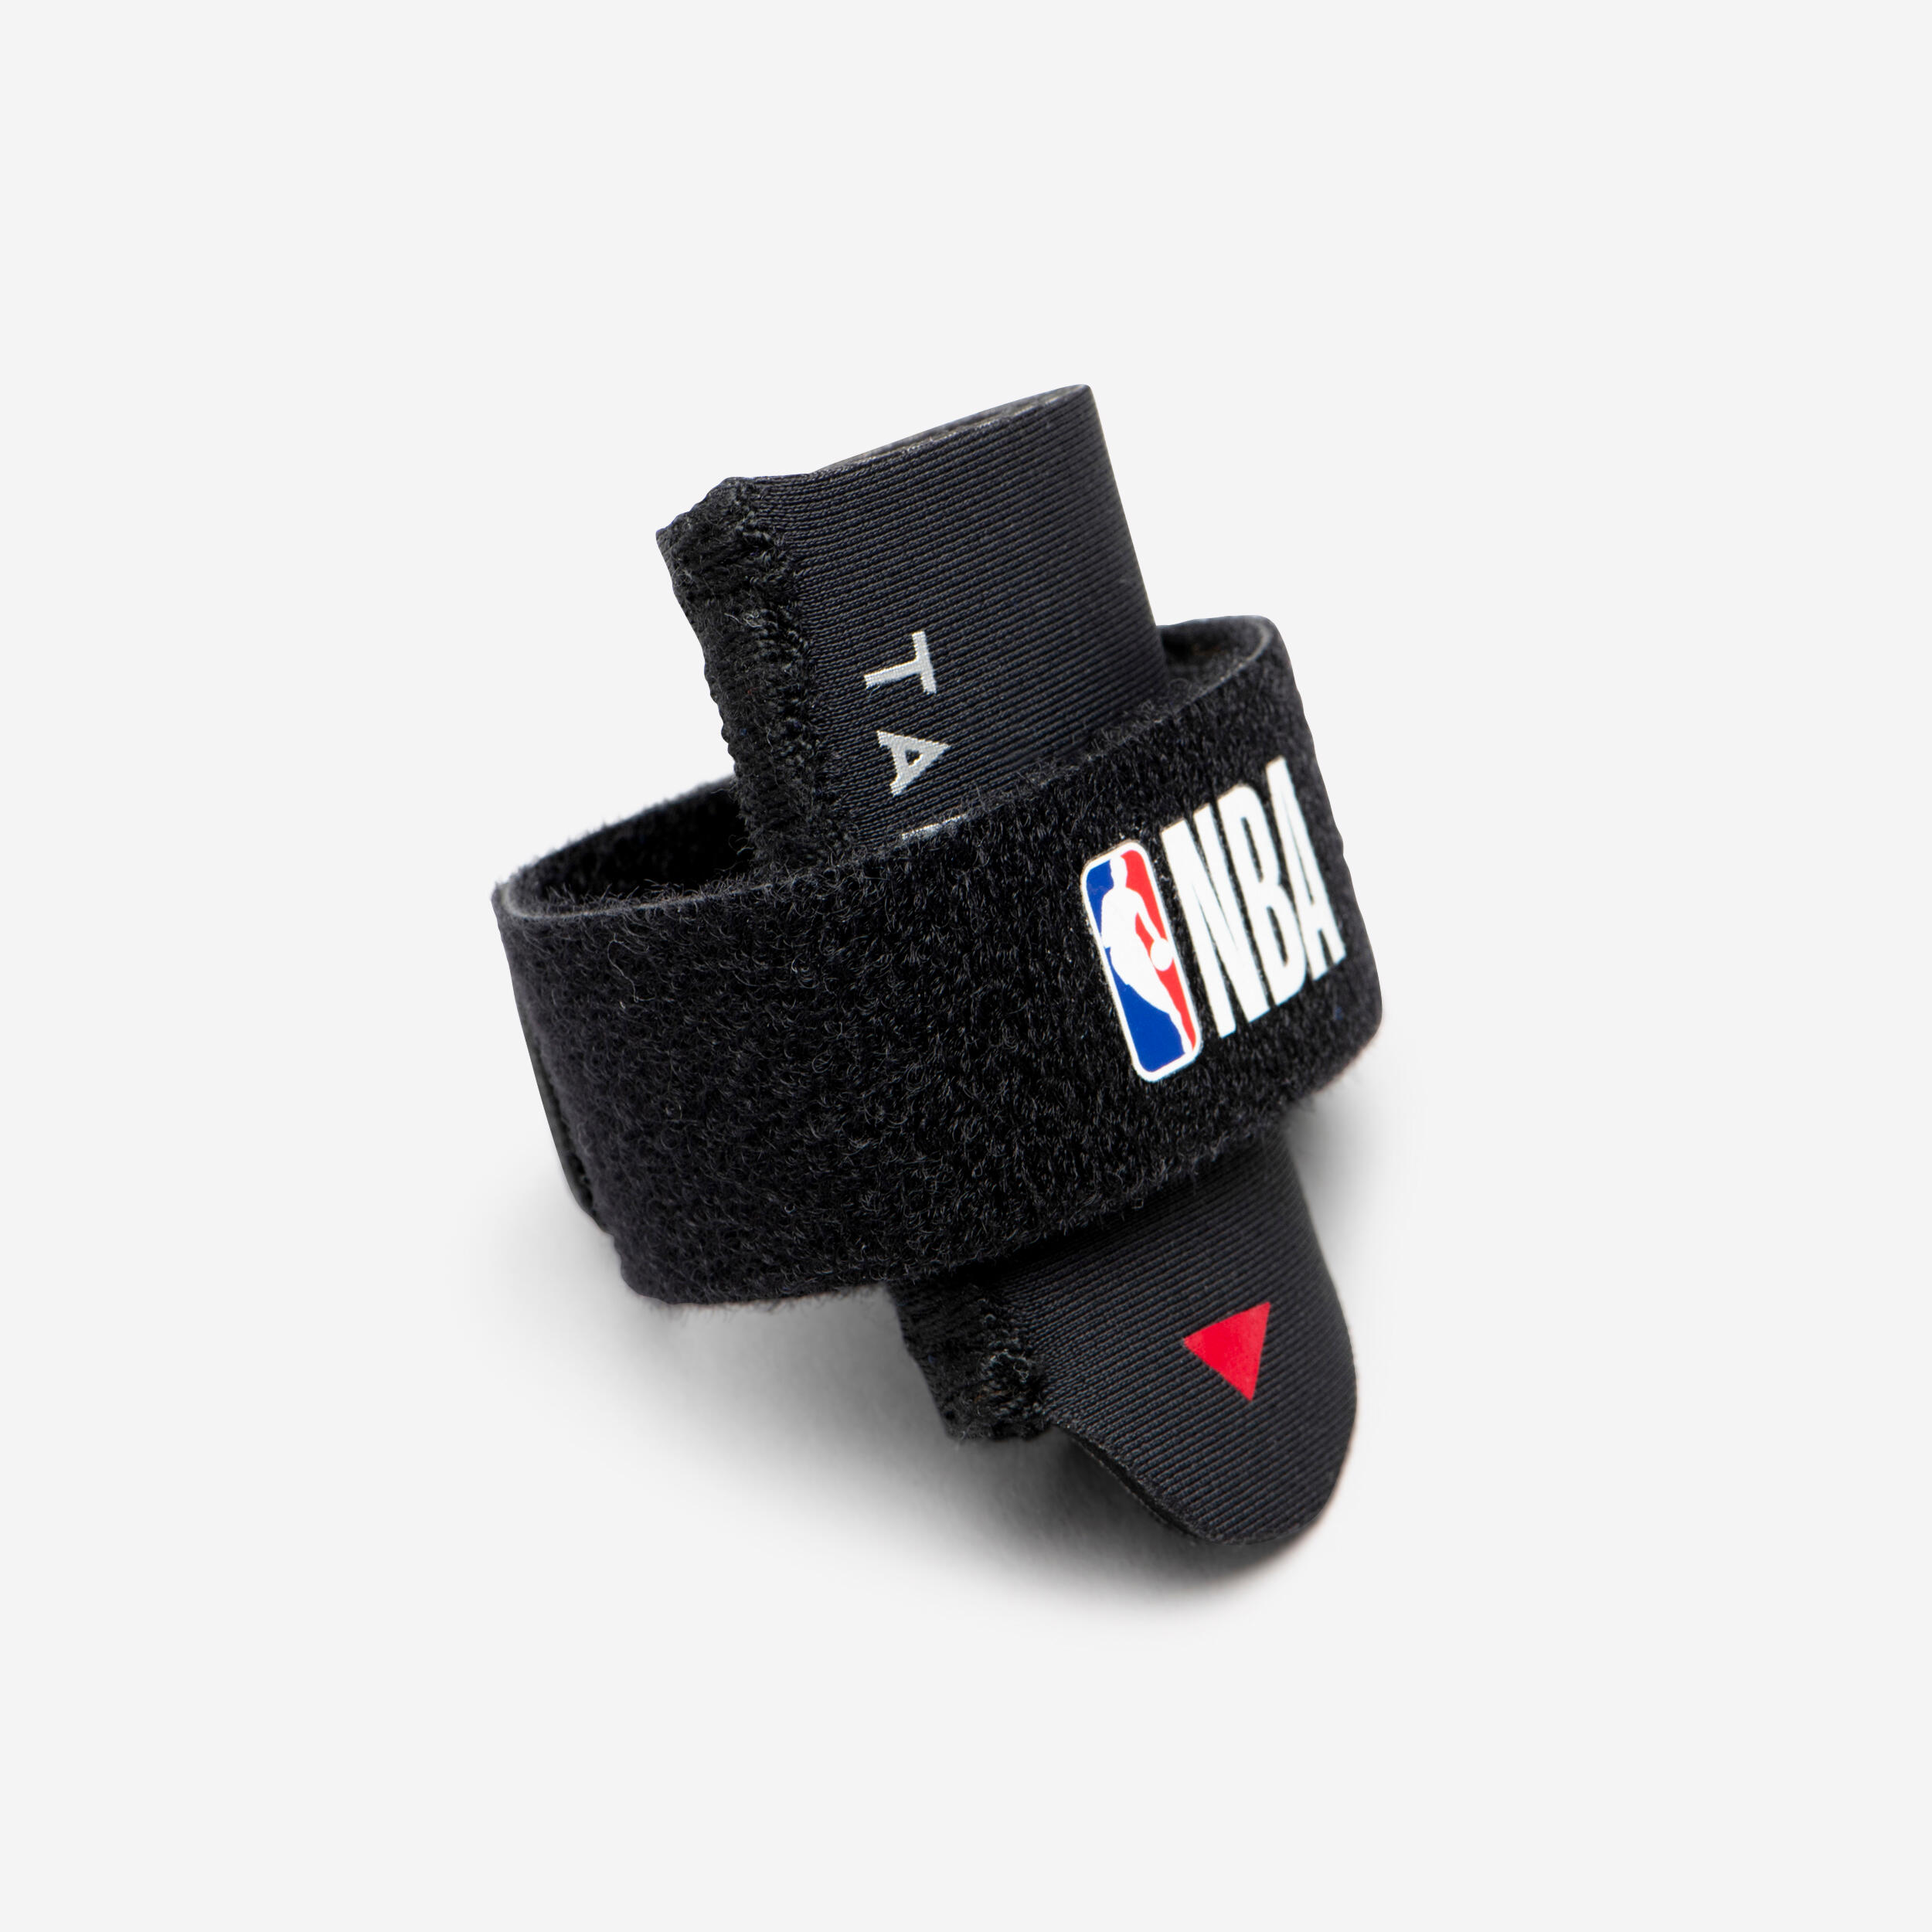 Adult Finger Support and Protect NBA Strong 500 - Black 1/7